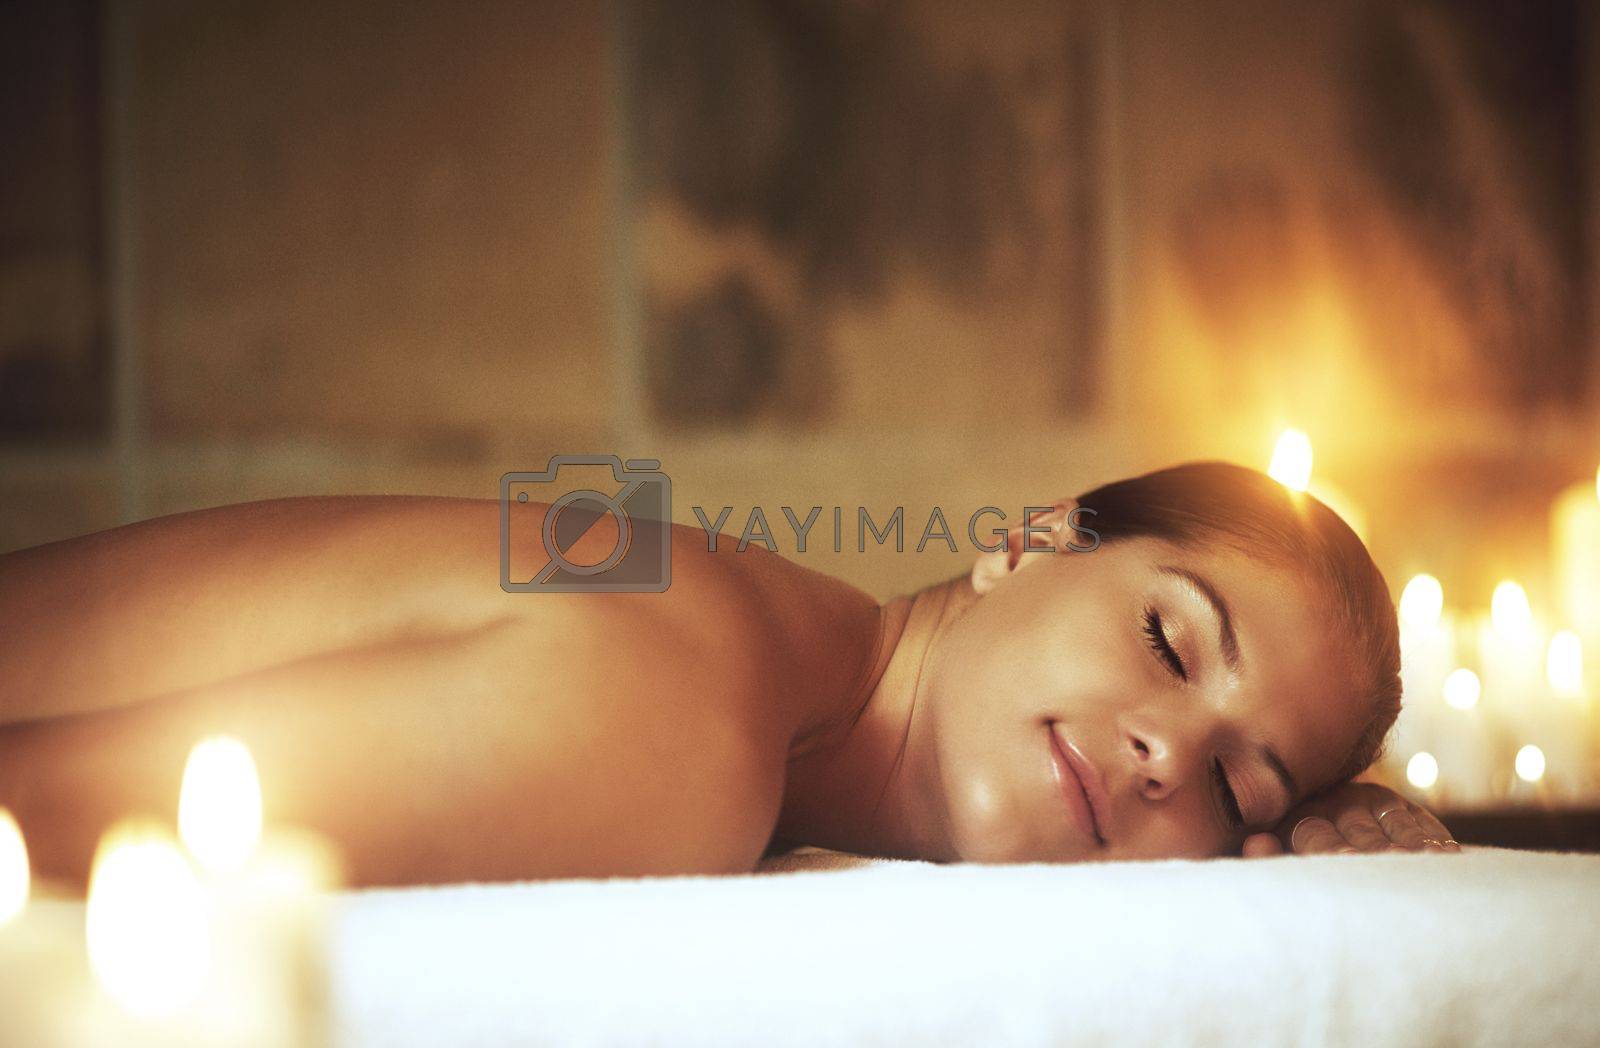 Royalty free image of Keep calm and have a spa day. Closeup shot of a young woman relaxing during a spa treatment. by YuriArcurs